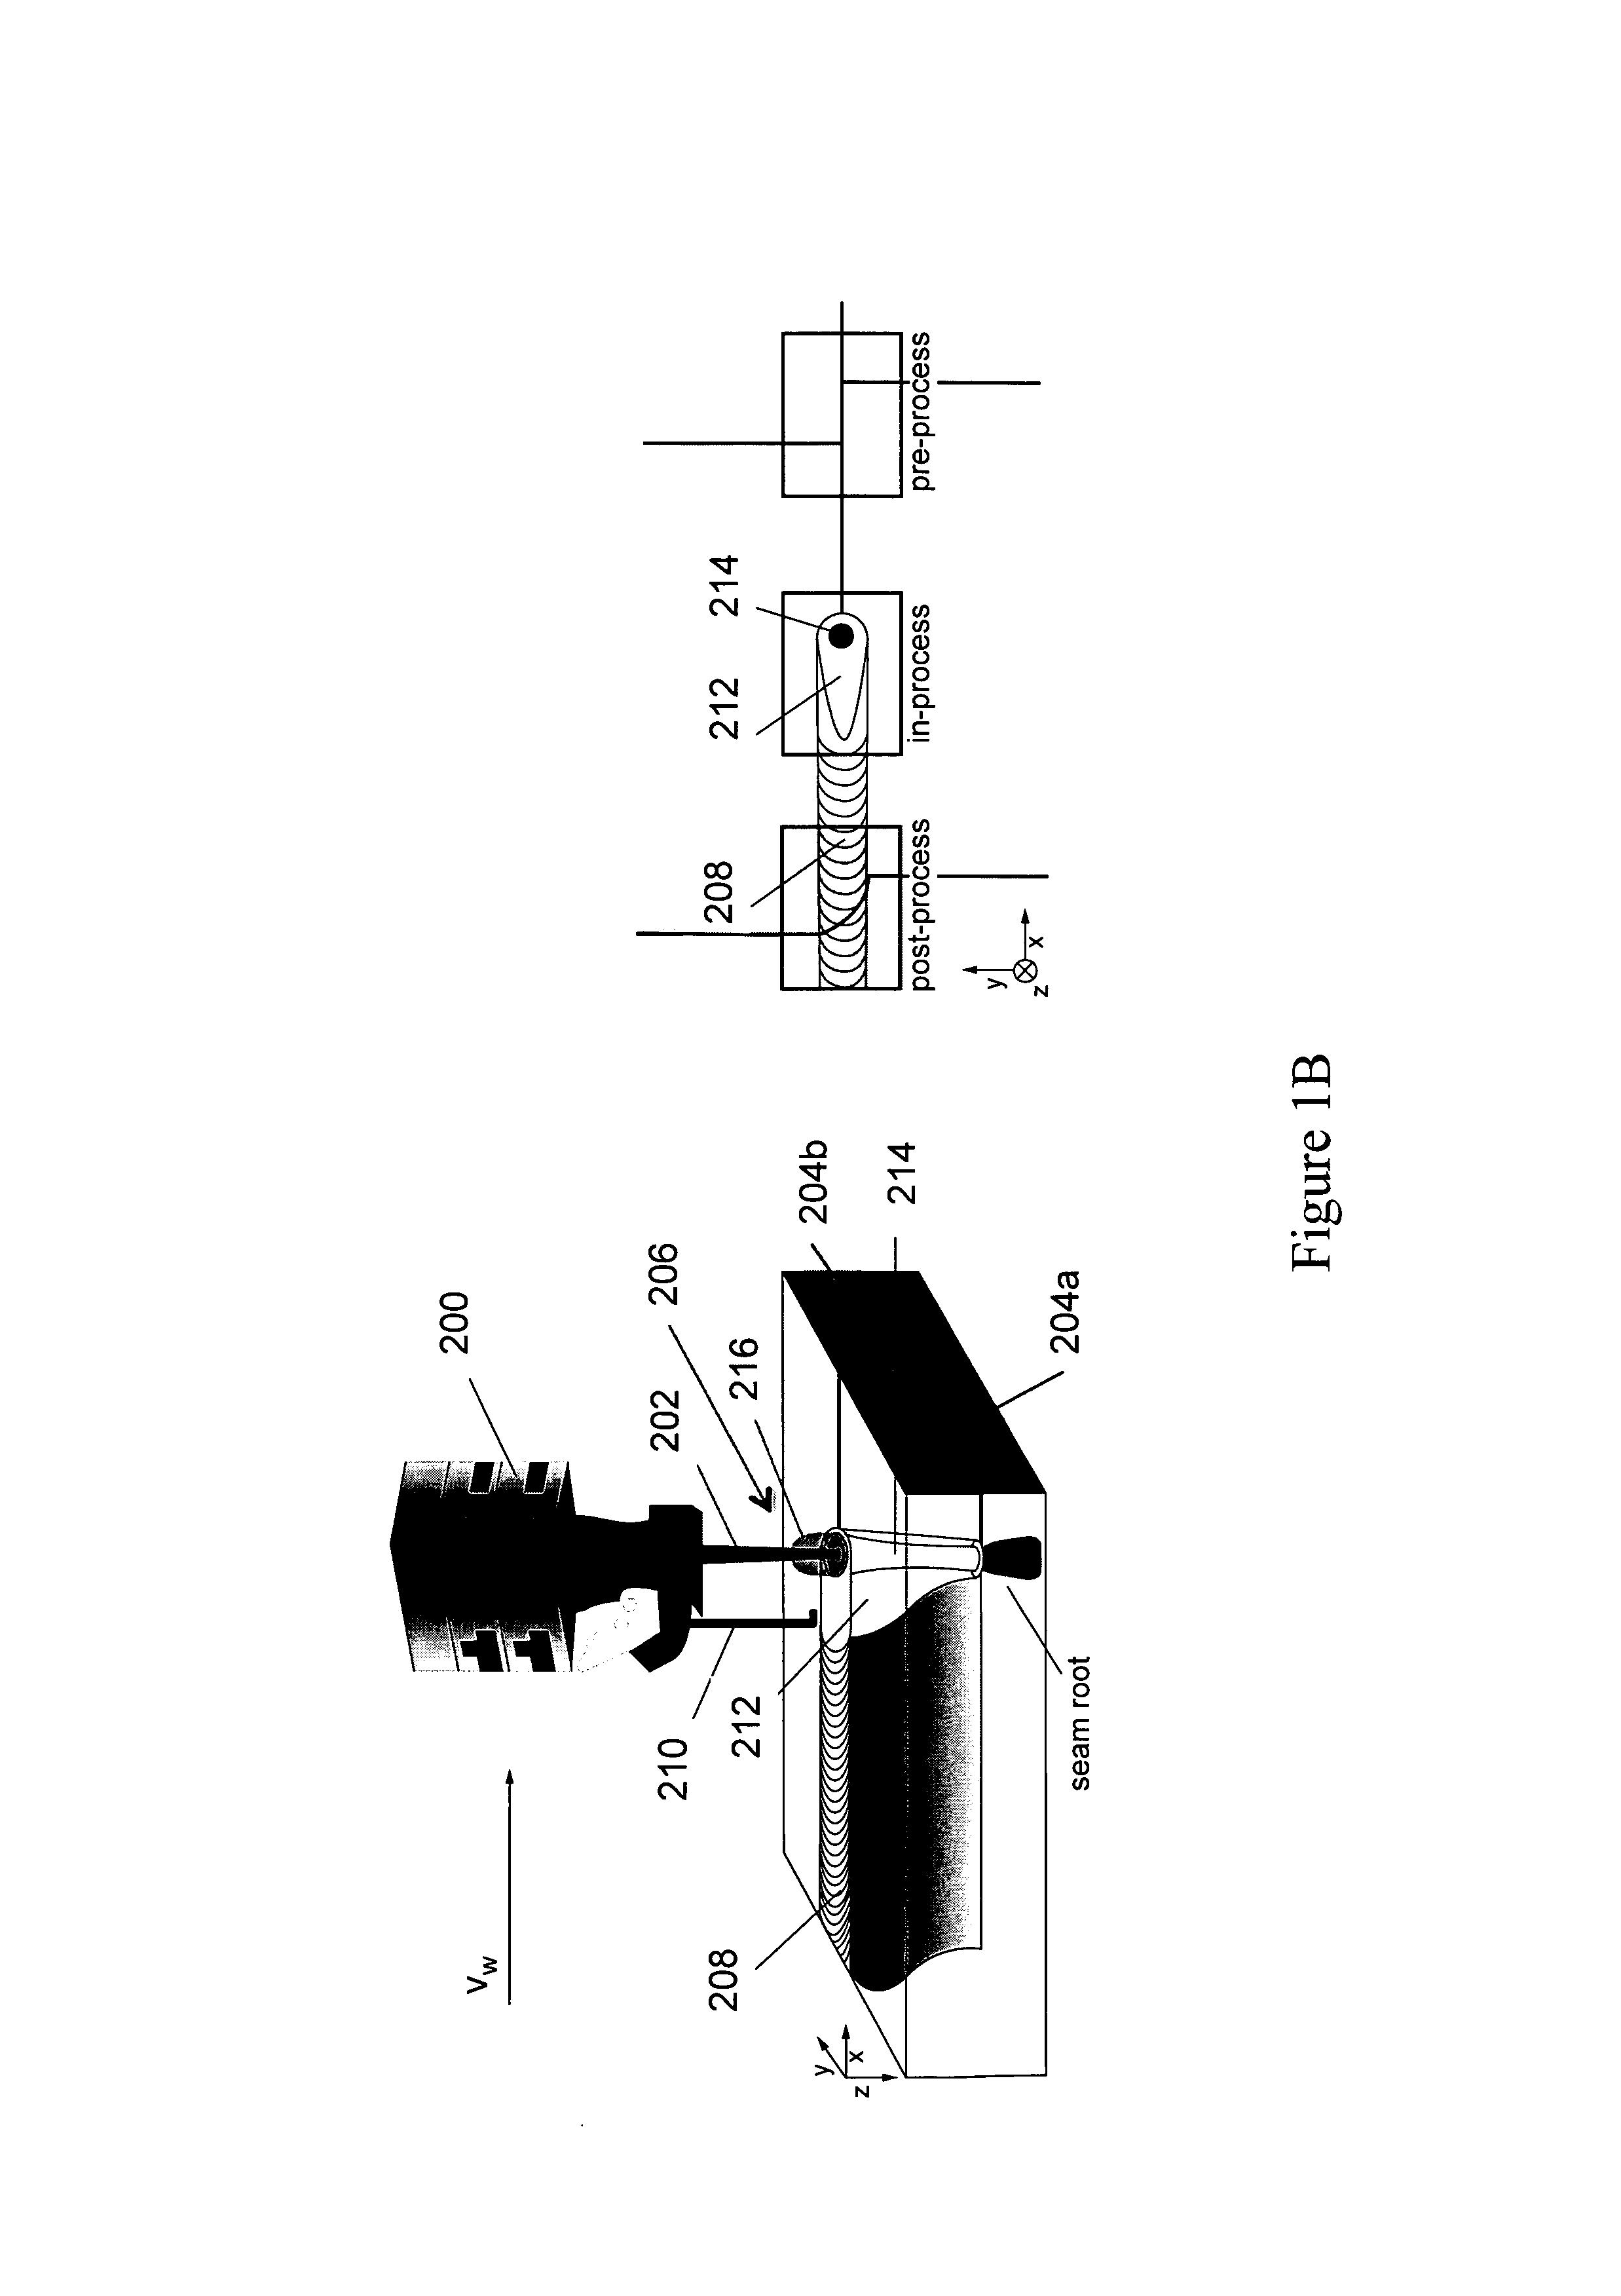 Method for controlling a laser processing operation by means of a reinforcement learning agent and laser material processing head using the same